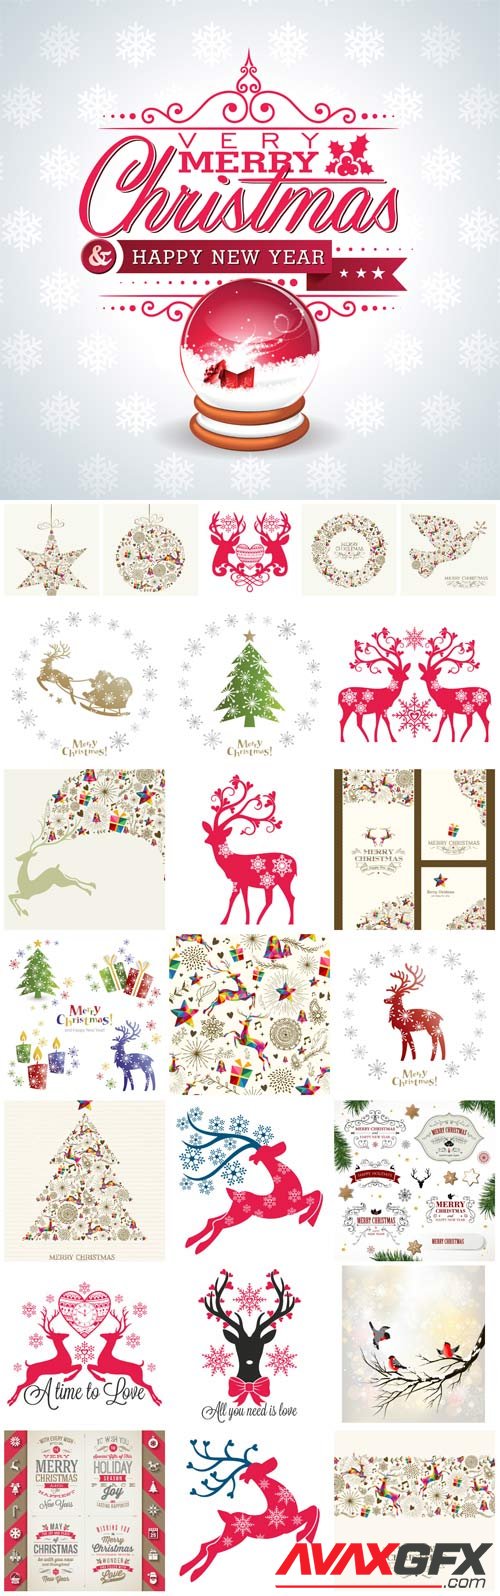 New Year and Christmas illustrations in vector №3